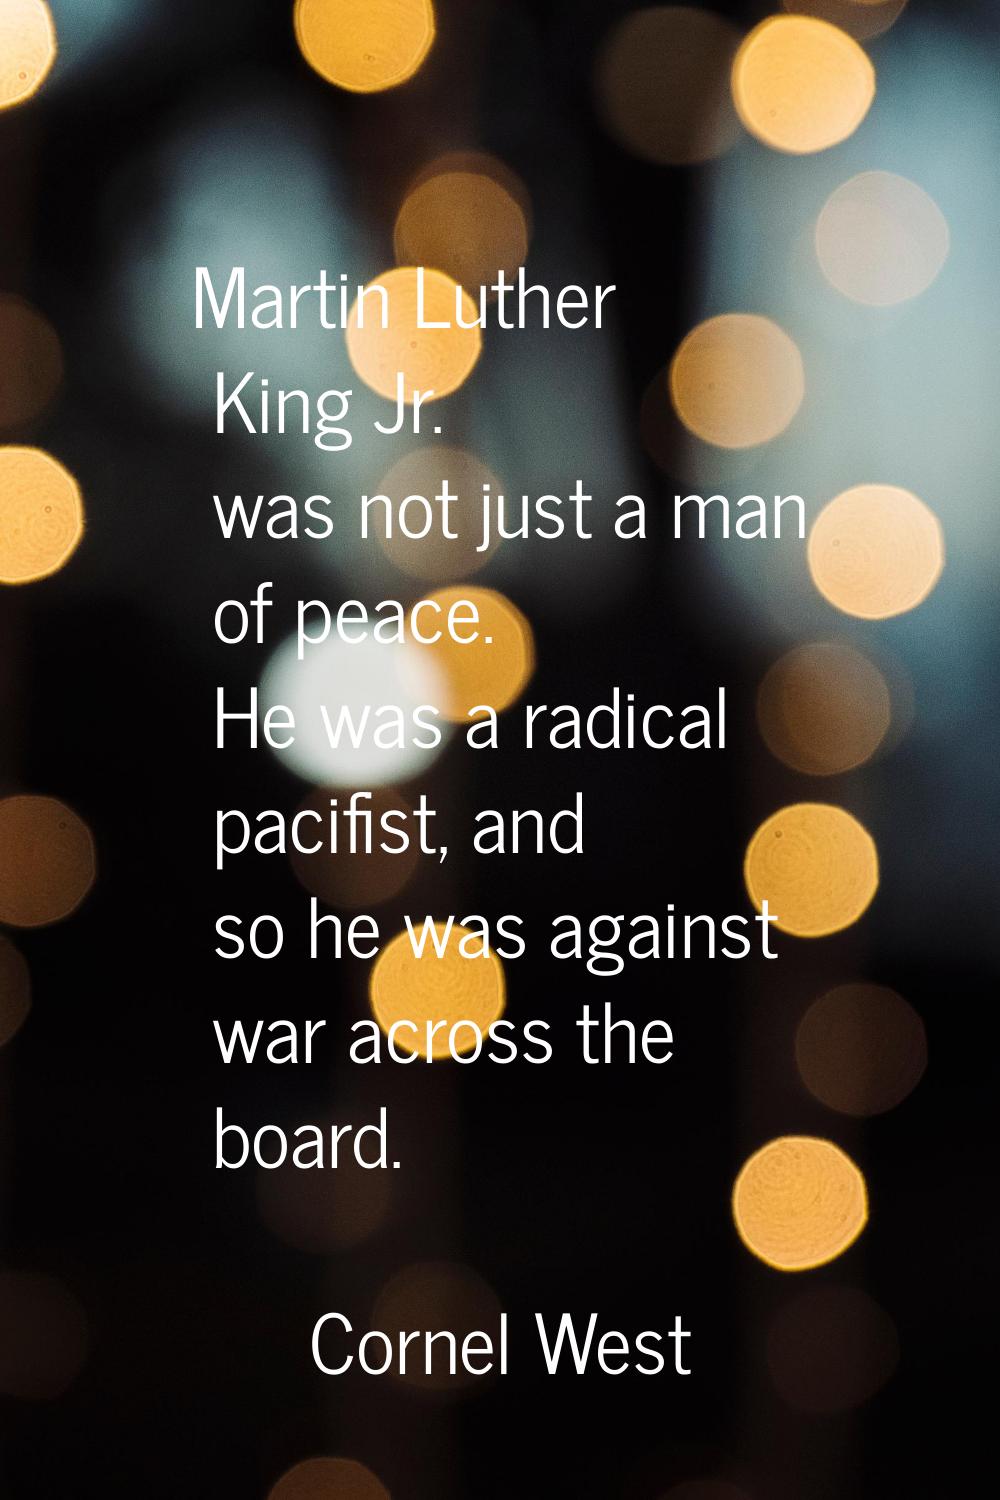 Martin Luther King Jr. was not just a man of peace. He was a radical pacifist, and so he was agains